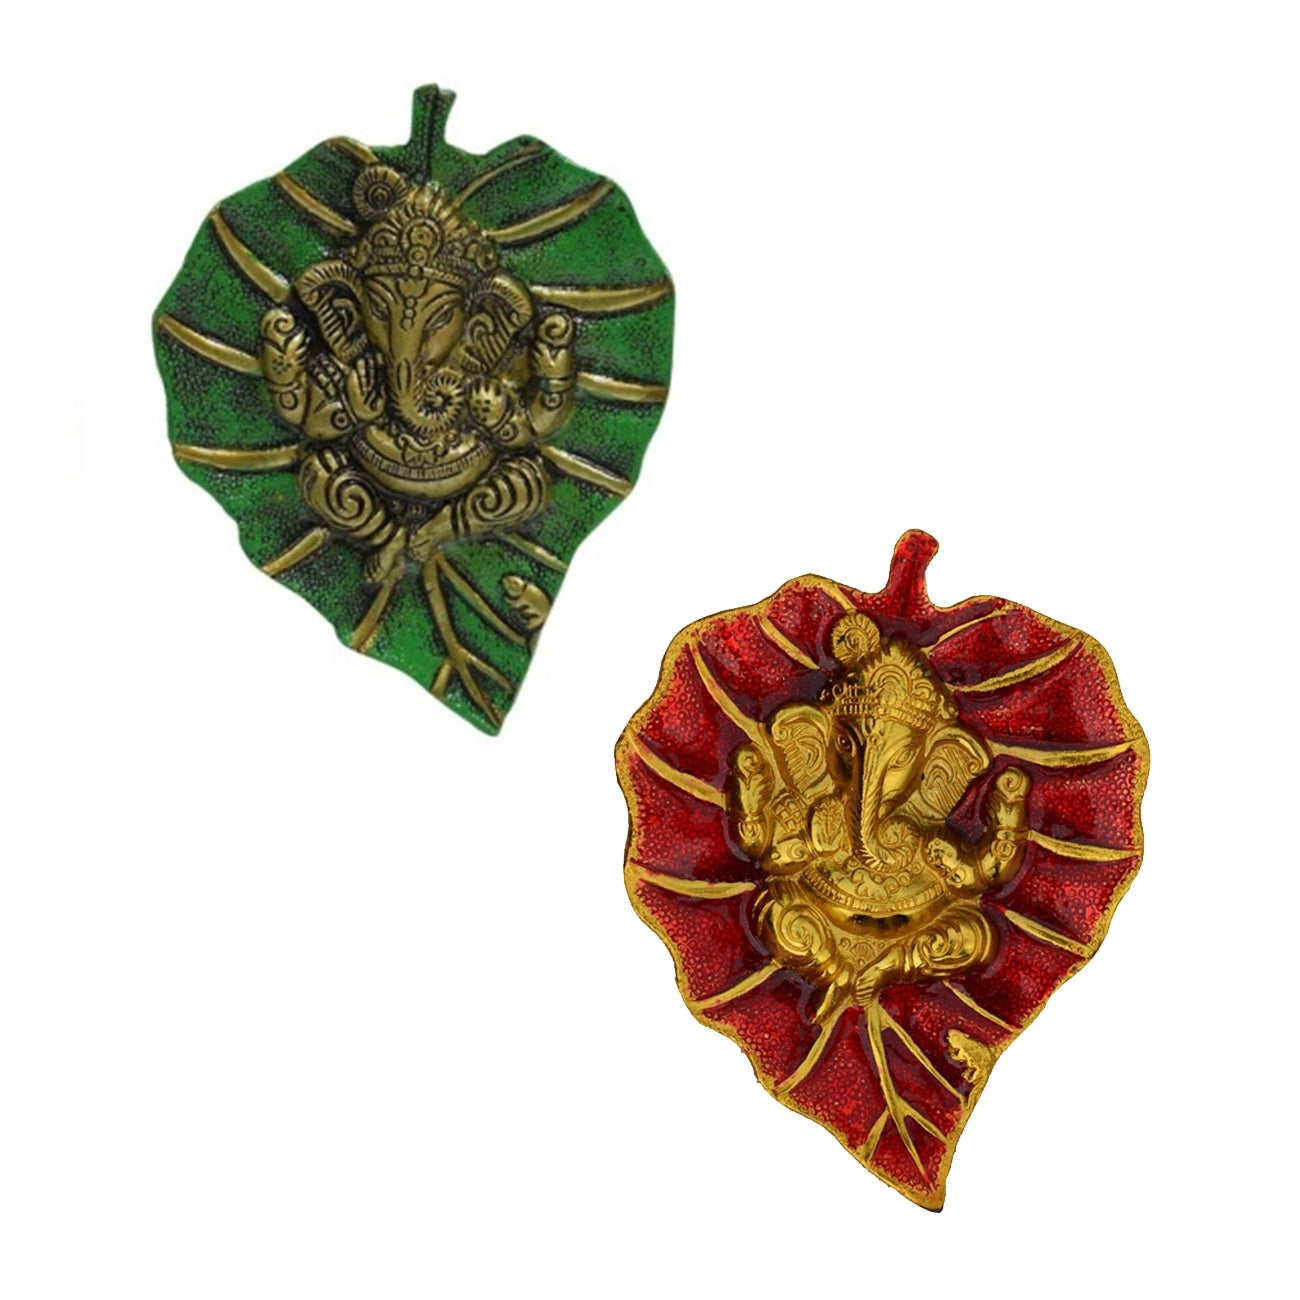 Lord Ganesha Idol On Green And Red Leaf Set Of 2 Metal Wall Hangings 1